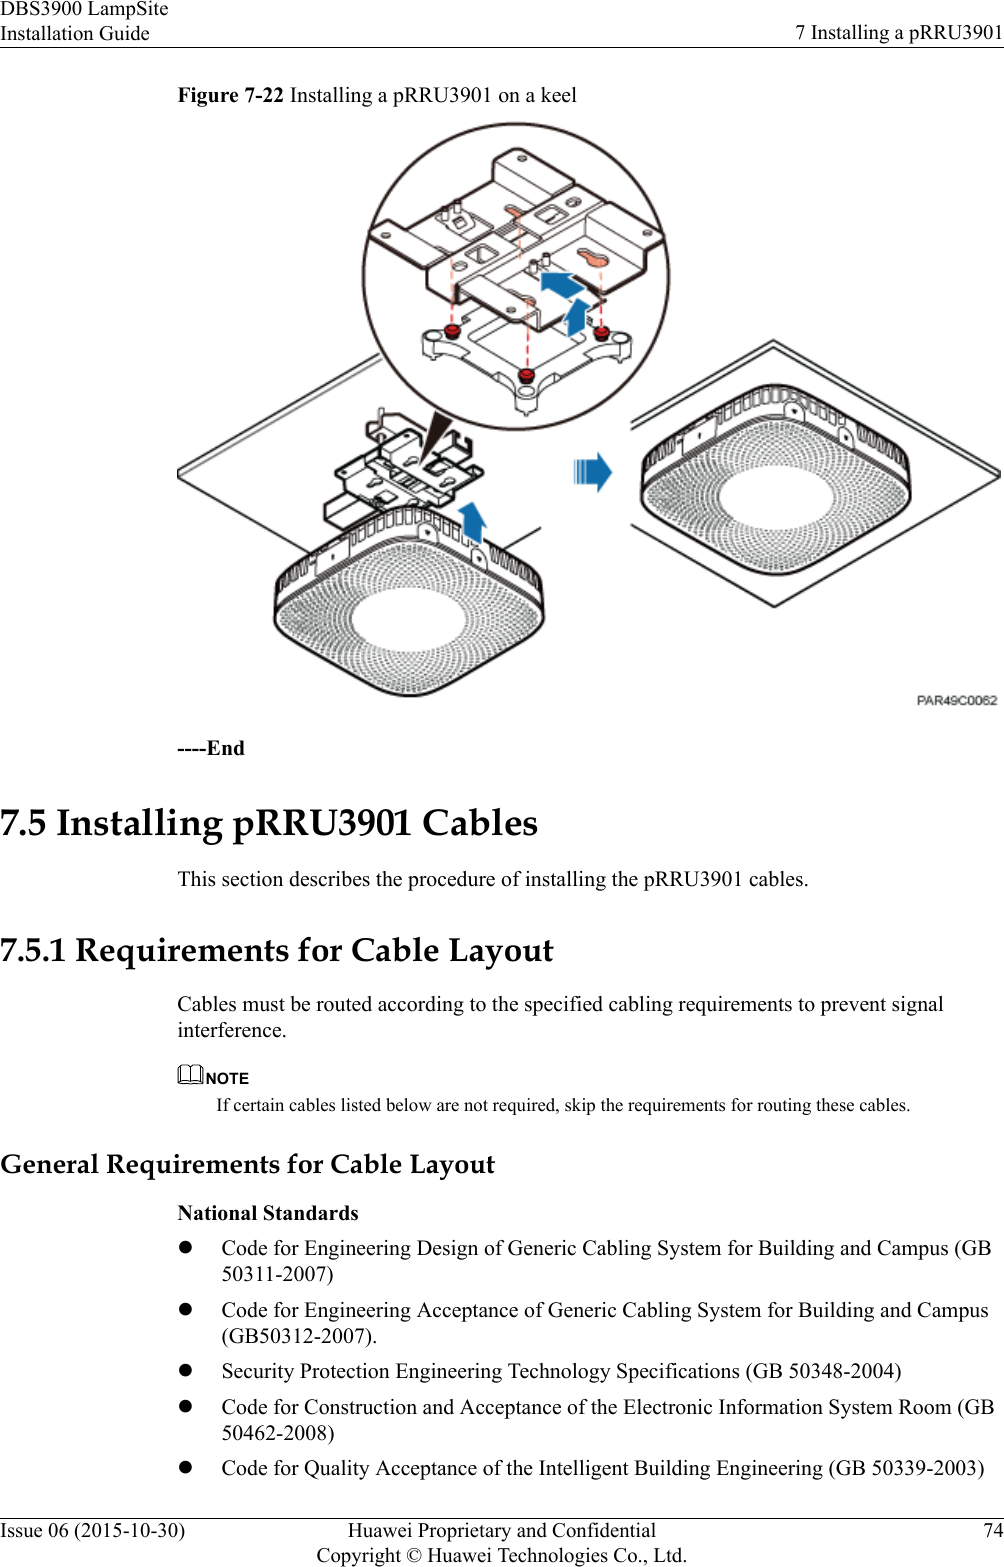 Figure 7-22 Installing a pRRU3901 on a keel----End7.5 Installing pRRU3901 CablesThis section describes the procedure of installing the pRRU3901 cables.7.5.1 Requirements for Cable LayoutCables must be routed according to the specified cabling requirements to prevent signalinterference.NOTEIf certain cables listed below are not required, skip the requirements for routing these cables.General Requirements for Cable LayoutNational StandardslCode for Engineering Design of Generic Cabling System for Building and Campus (GB50311-2007)lCode for Engineering Acceptance of Generic Cabling System for Building and Campus(GB50312-2007).lSecurity Protection Engineering Technology Specifications (GB 50348-2004)lCode for Construction and Acceptance of the Electronic Information System Room (GB50462-2008)lCode for Quality Acceptance of the Intelligent Building Engineering (GB 50339-2003)DBS3900 LampSiteInstallation Guide 7 Installing a pRRU3901Issue 06 (2015-10-30) Huawei Proprietary and ConfidentialCopyright © Huawei Technologies Co., Ltd.74